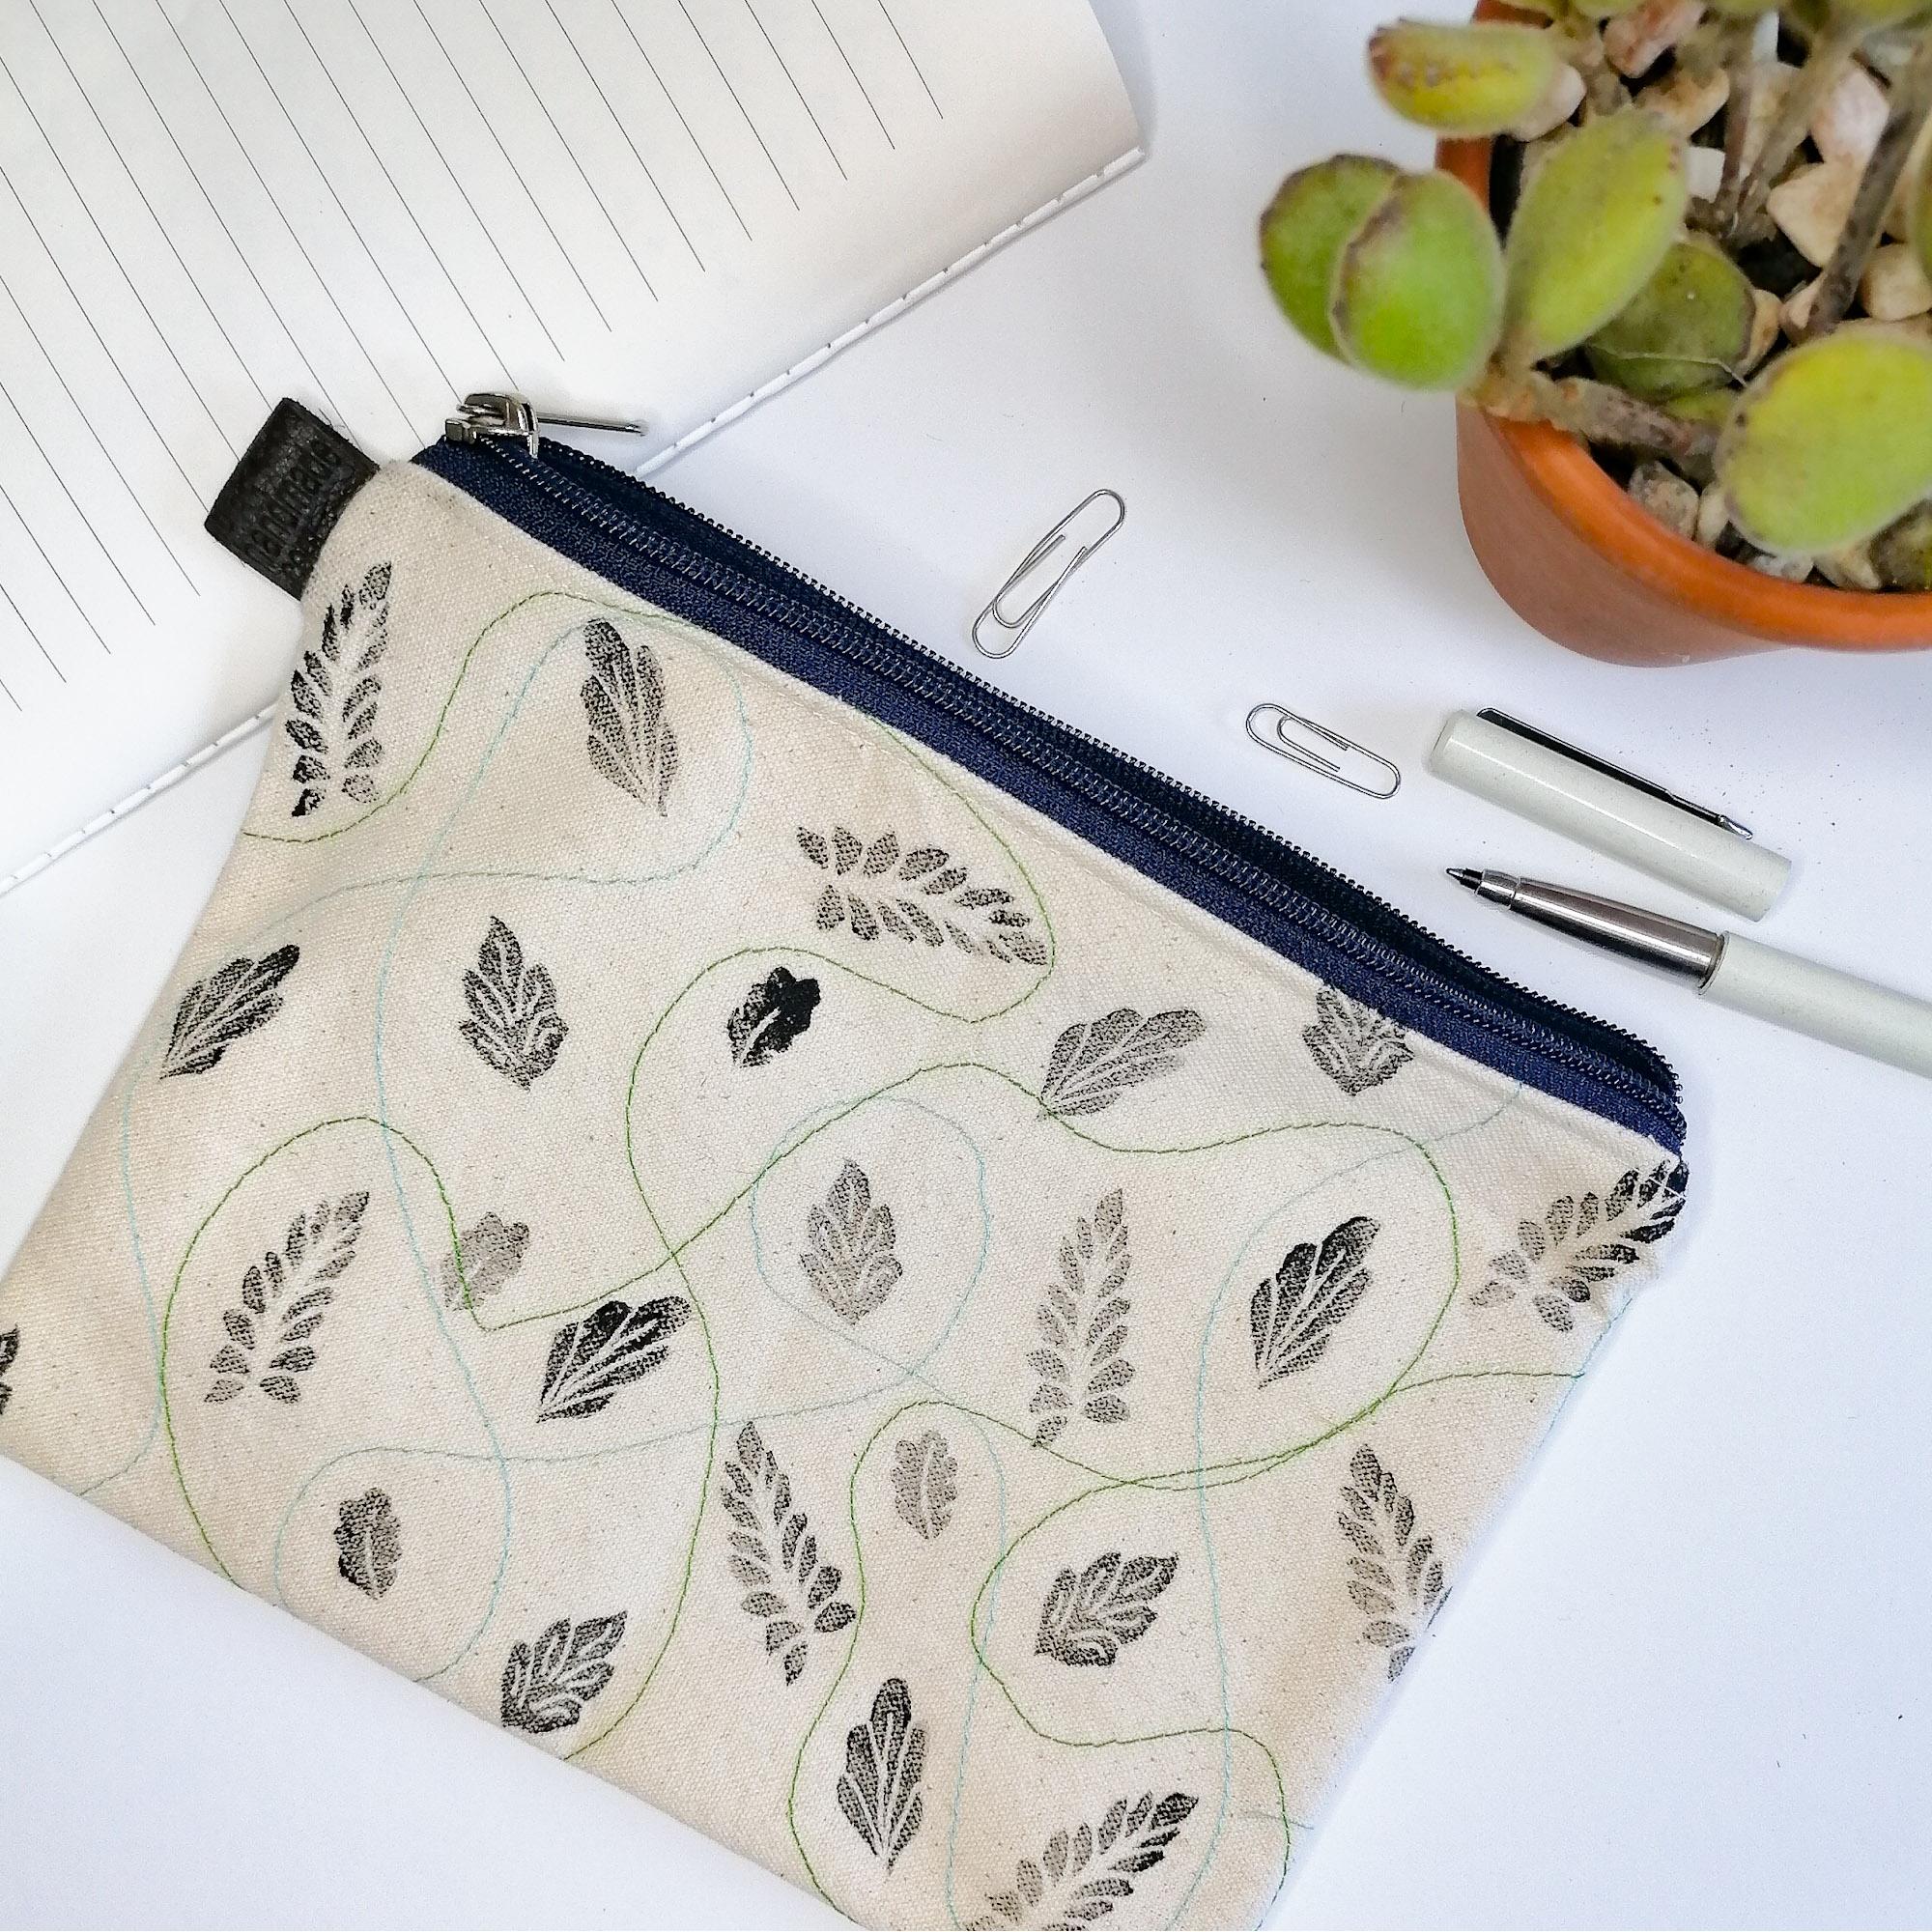 Lined Zipper Cosmetic Bag with handprinted black leaves with blue  and green wavy stitches in between. Blue zip. Leather tag.